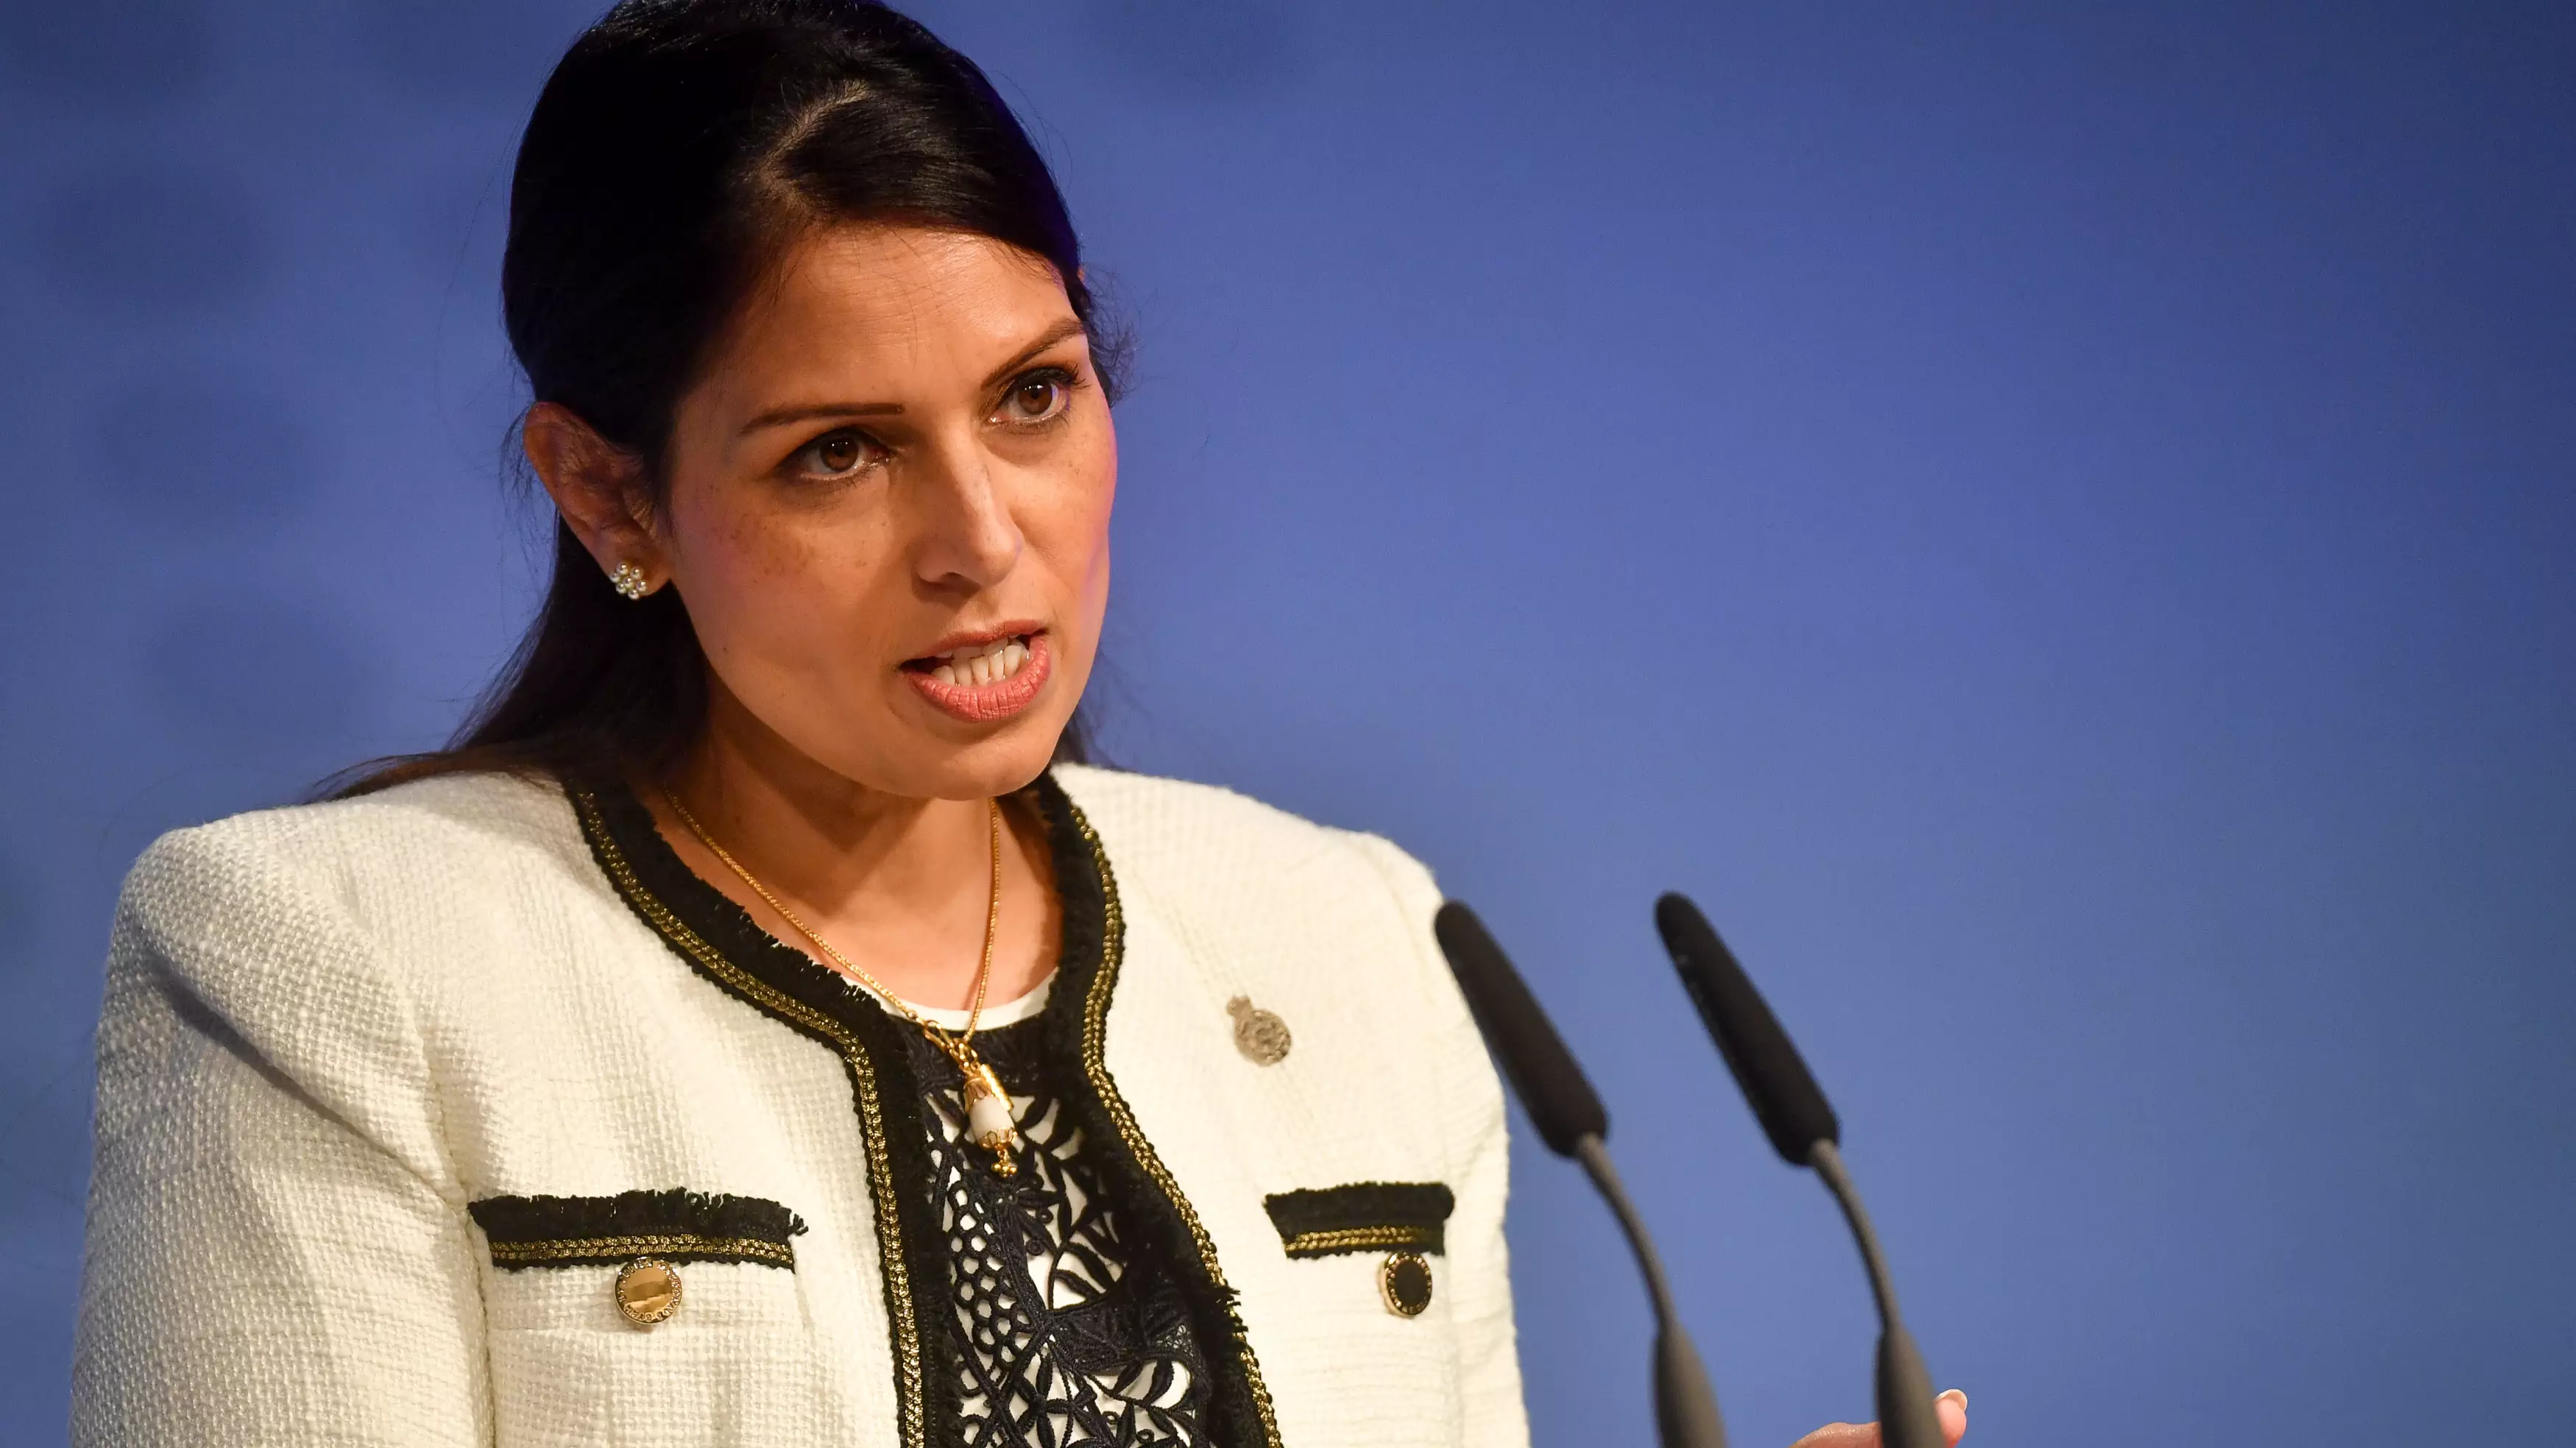 Two Men Jailed For Sharing Racist Snapchat Video Targeted At Priti Patel